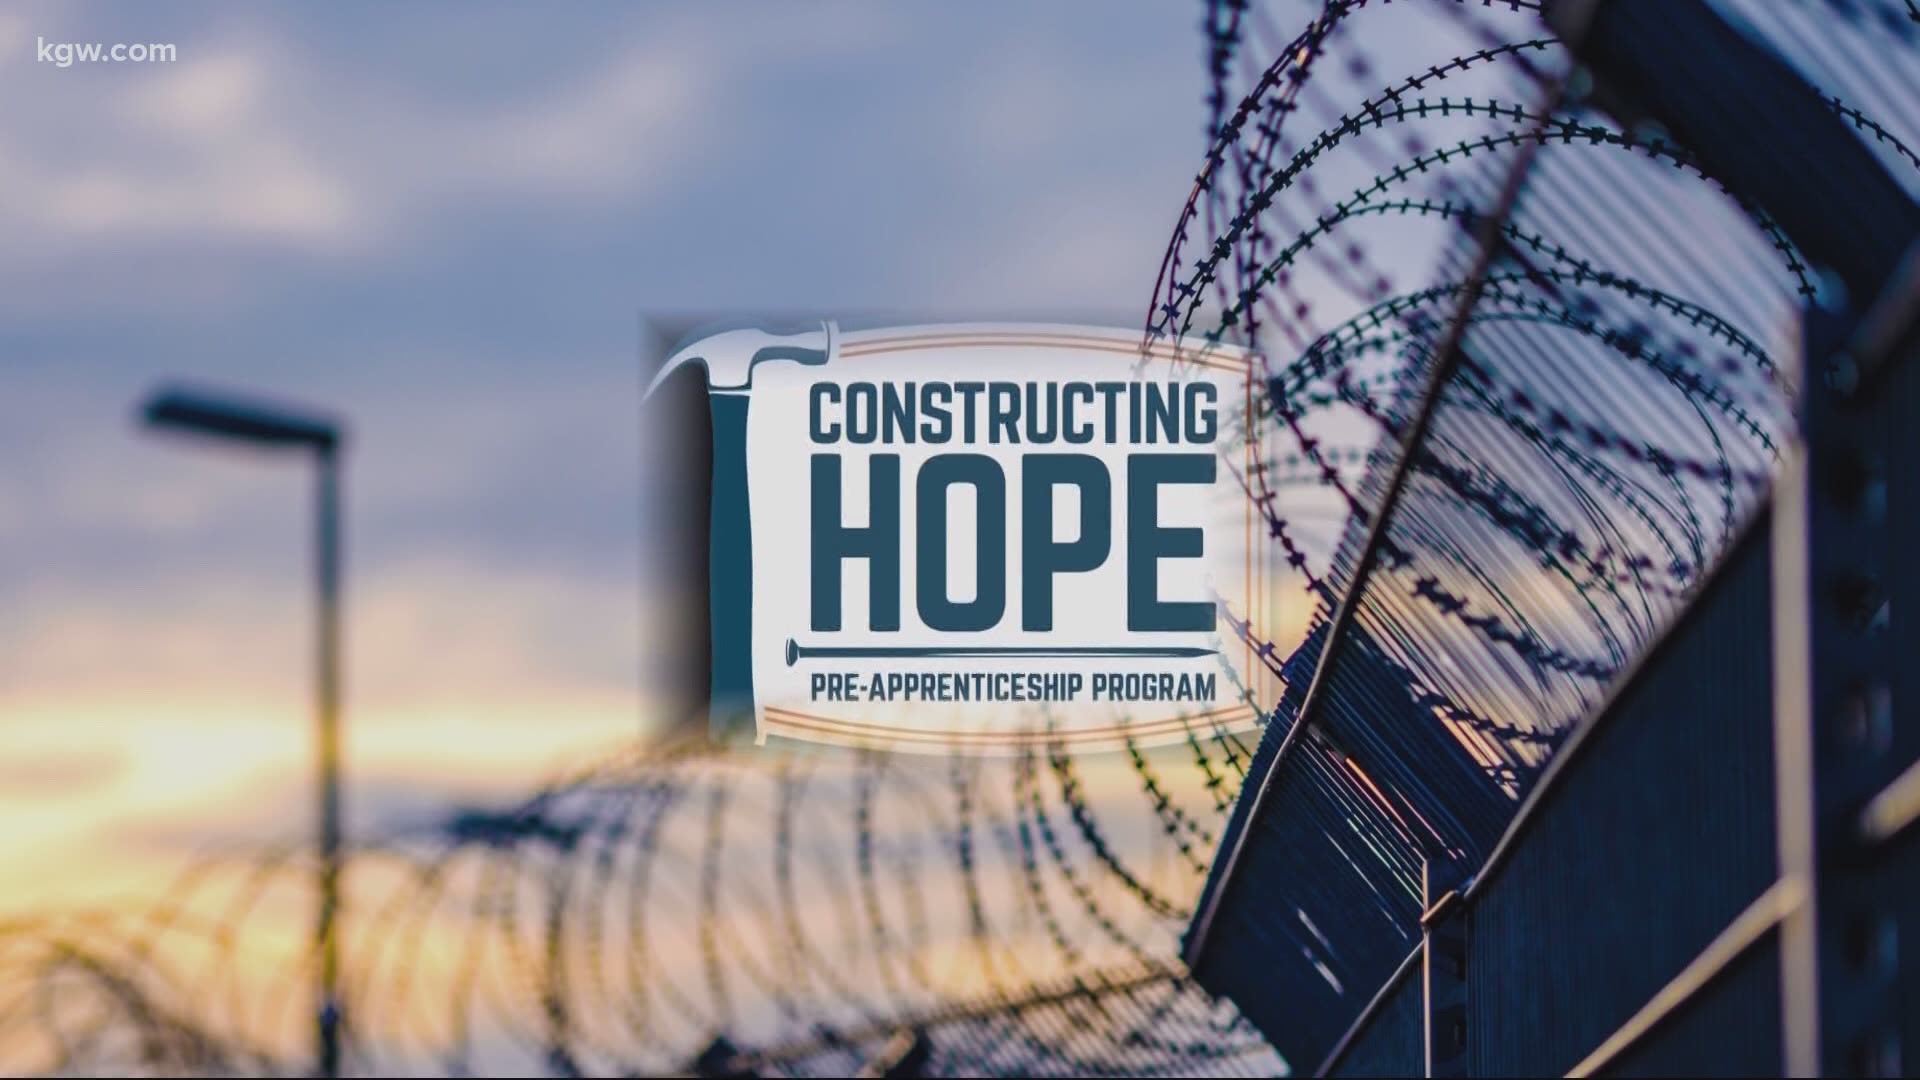 The organization offers training and placement in the construction industry for incarcerated people. They too have been financially affected by COVID-19.